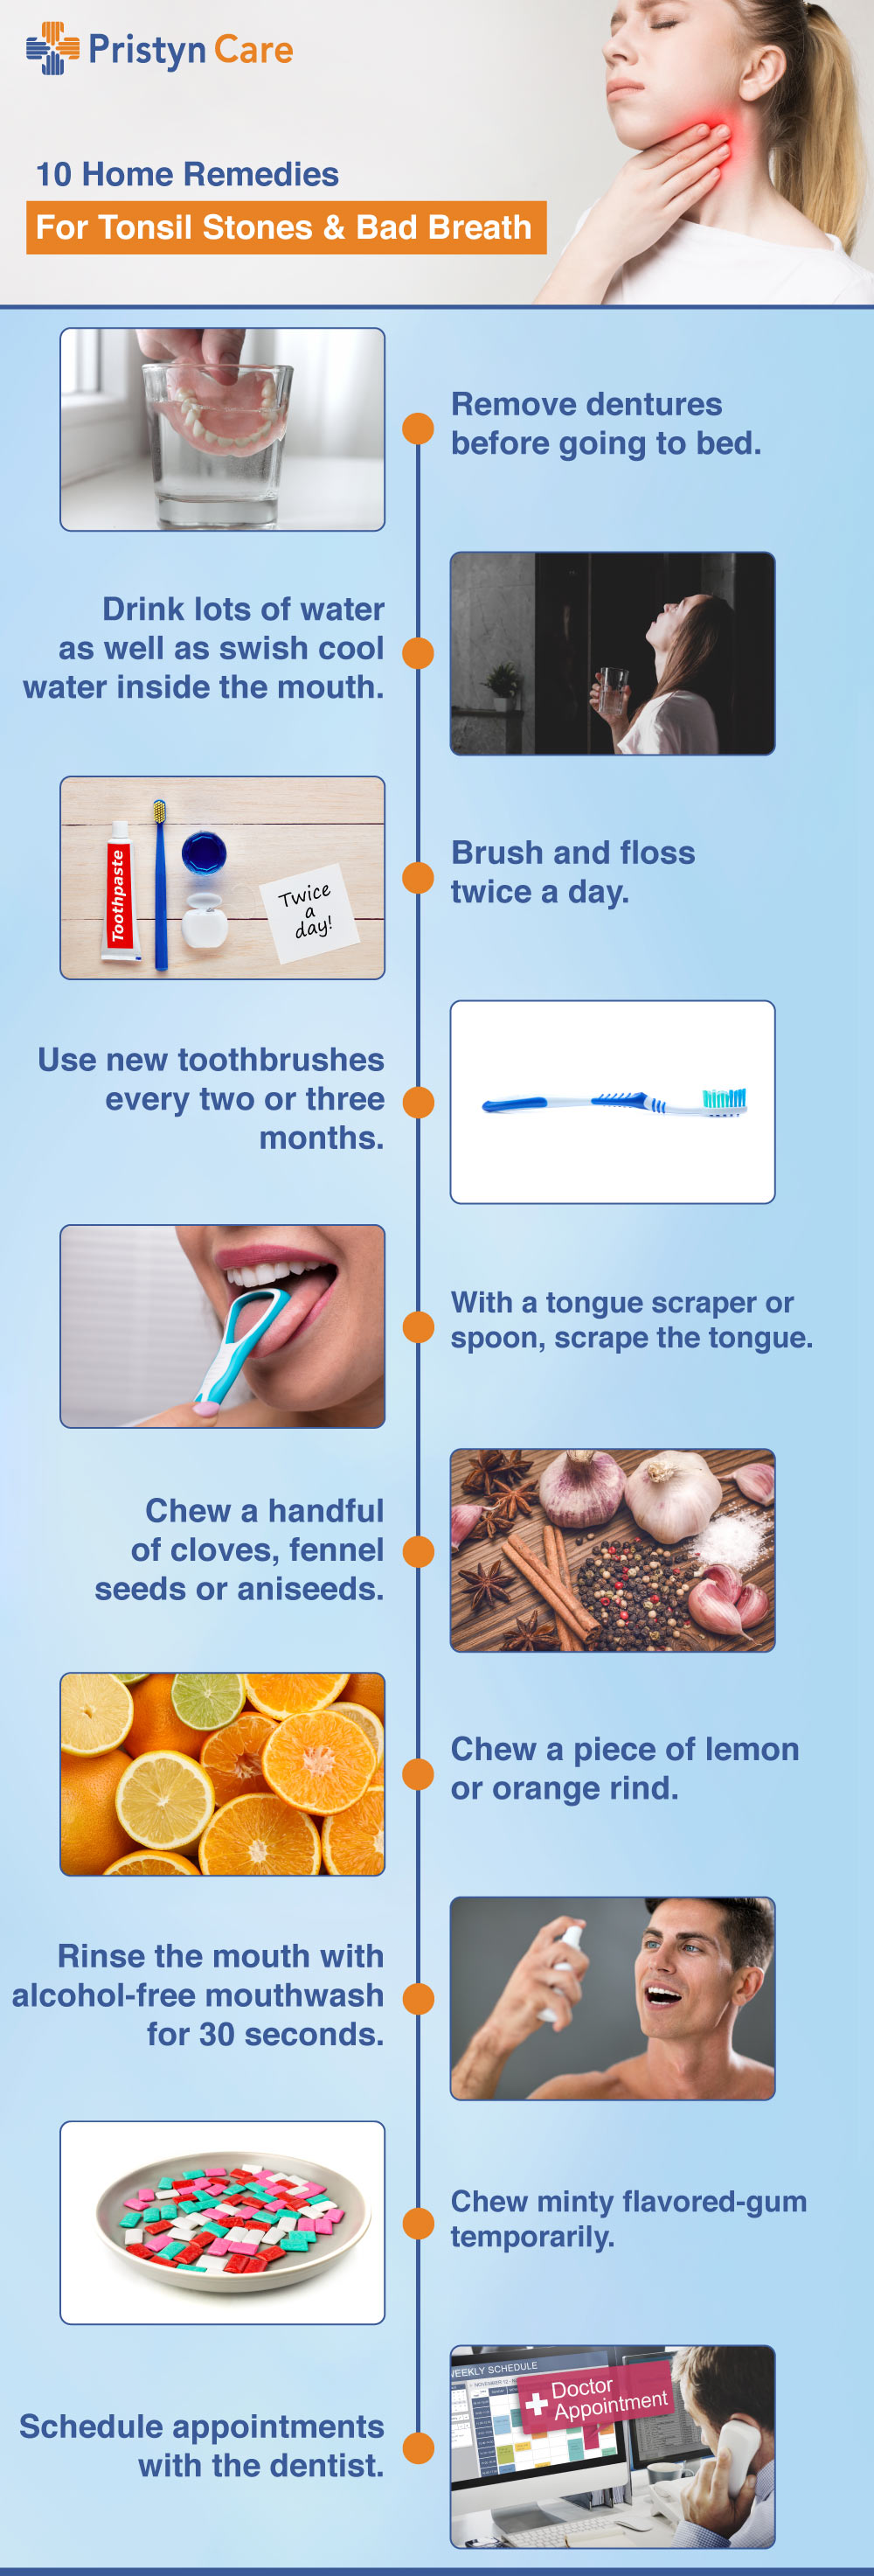 10-Home-Remedies-For-Tonsil-Stones-And-Bad-Breath